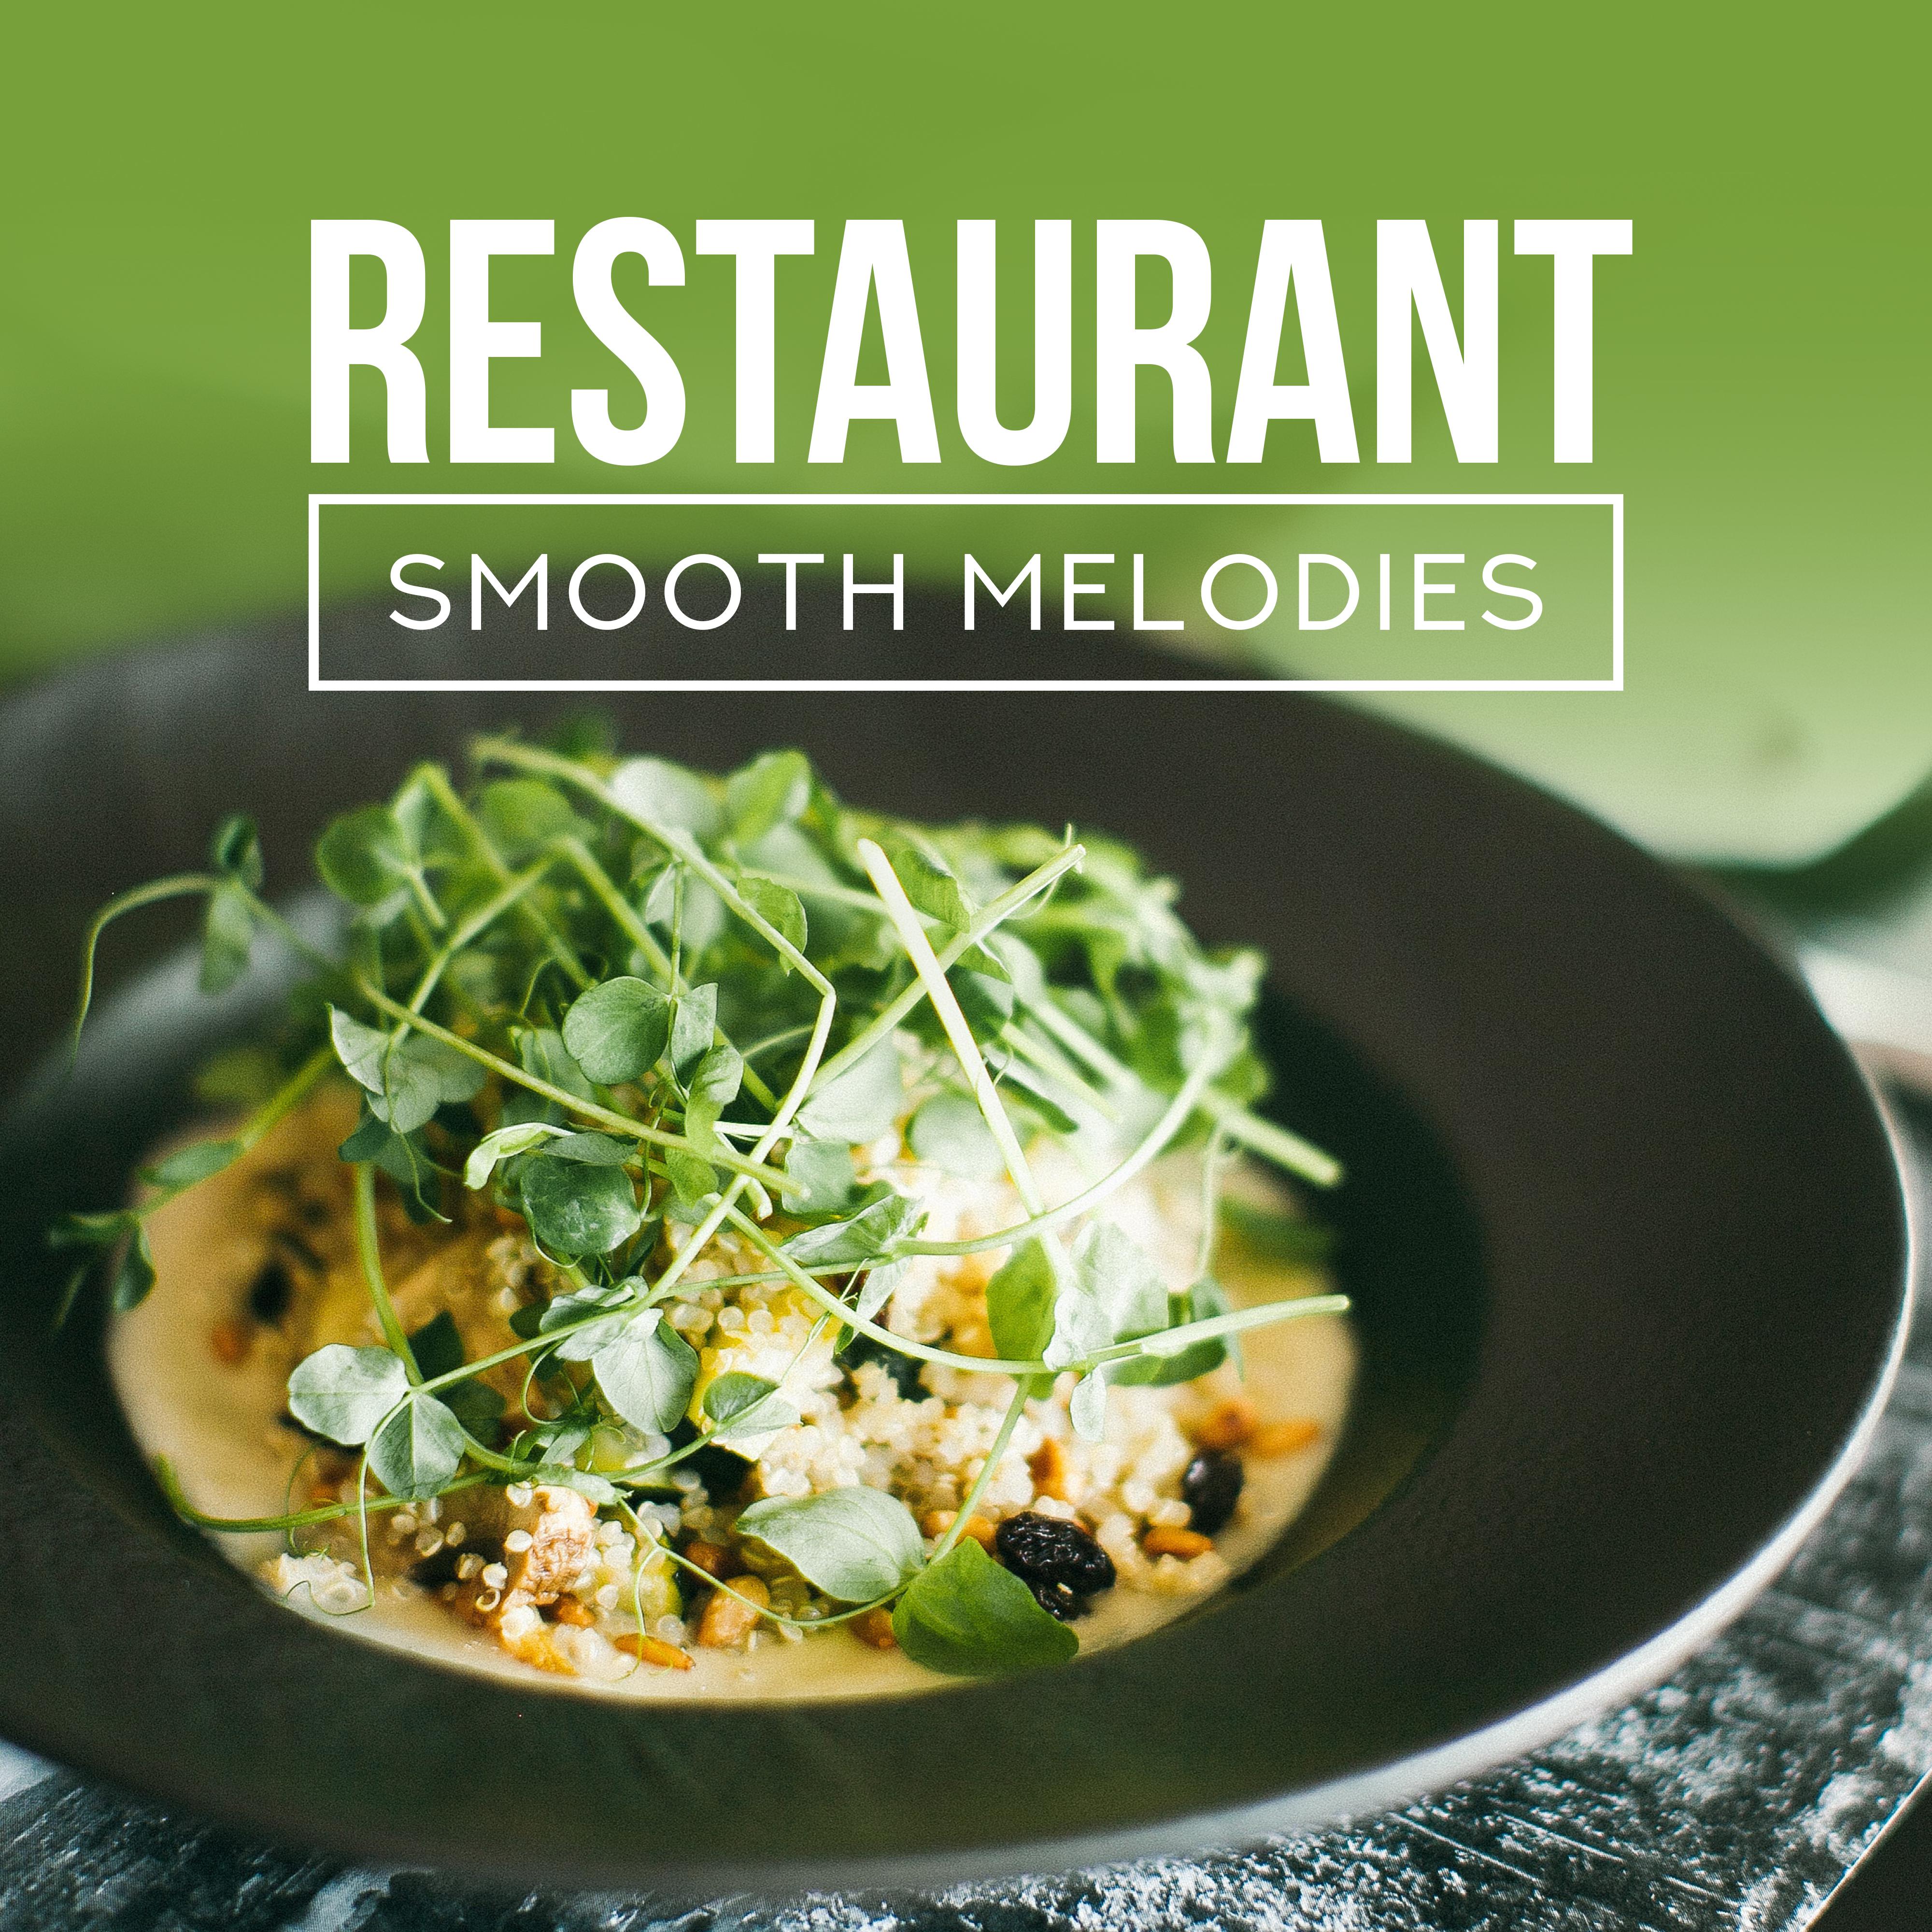 Restaurant Smooth Melodies  Jazz Music Ambient, Dinner Sounds, Relaxing Jazz After Work